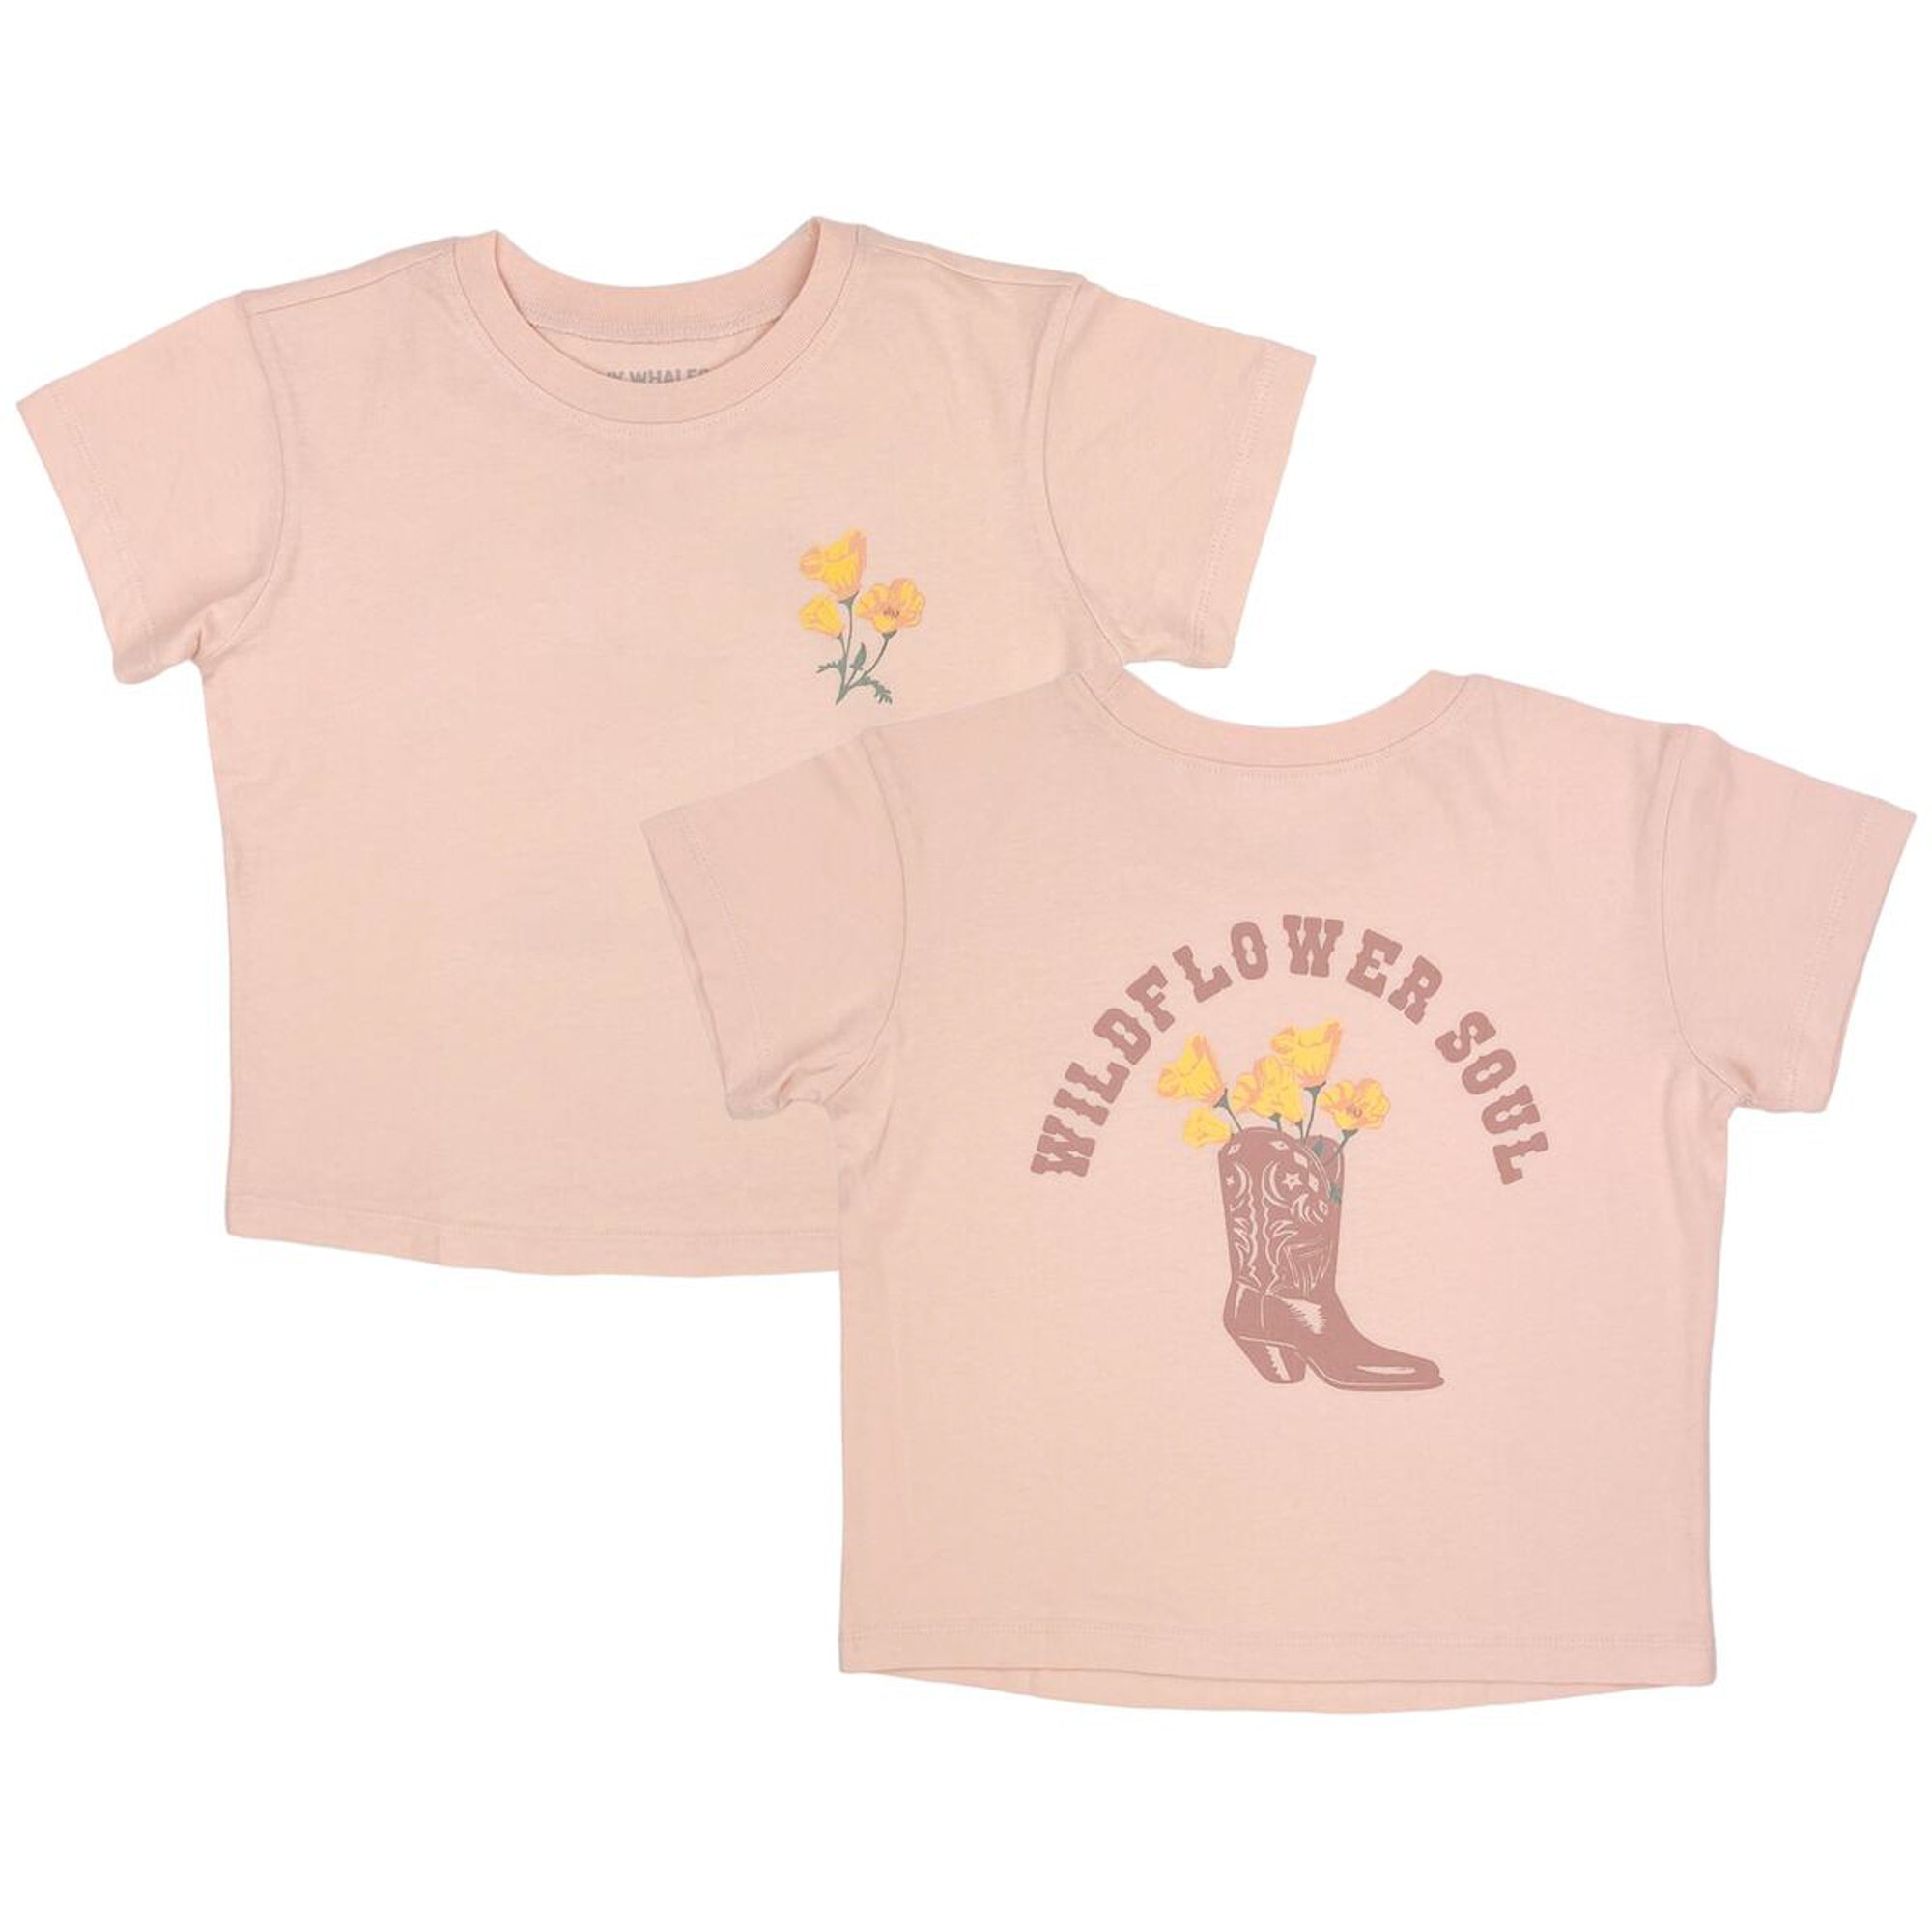 Tiny Whales_Wildflower Soul Boxy Tee_Tops